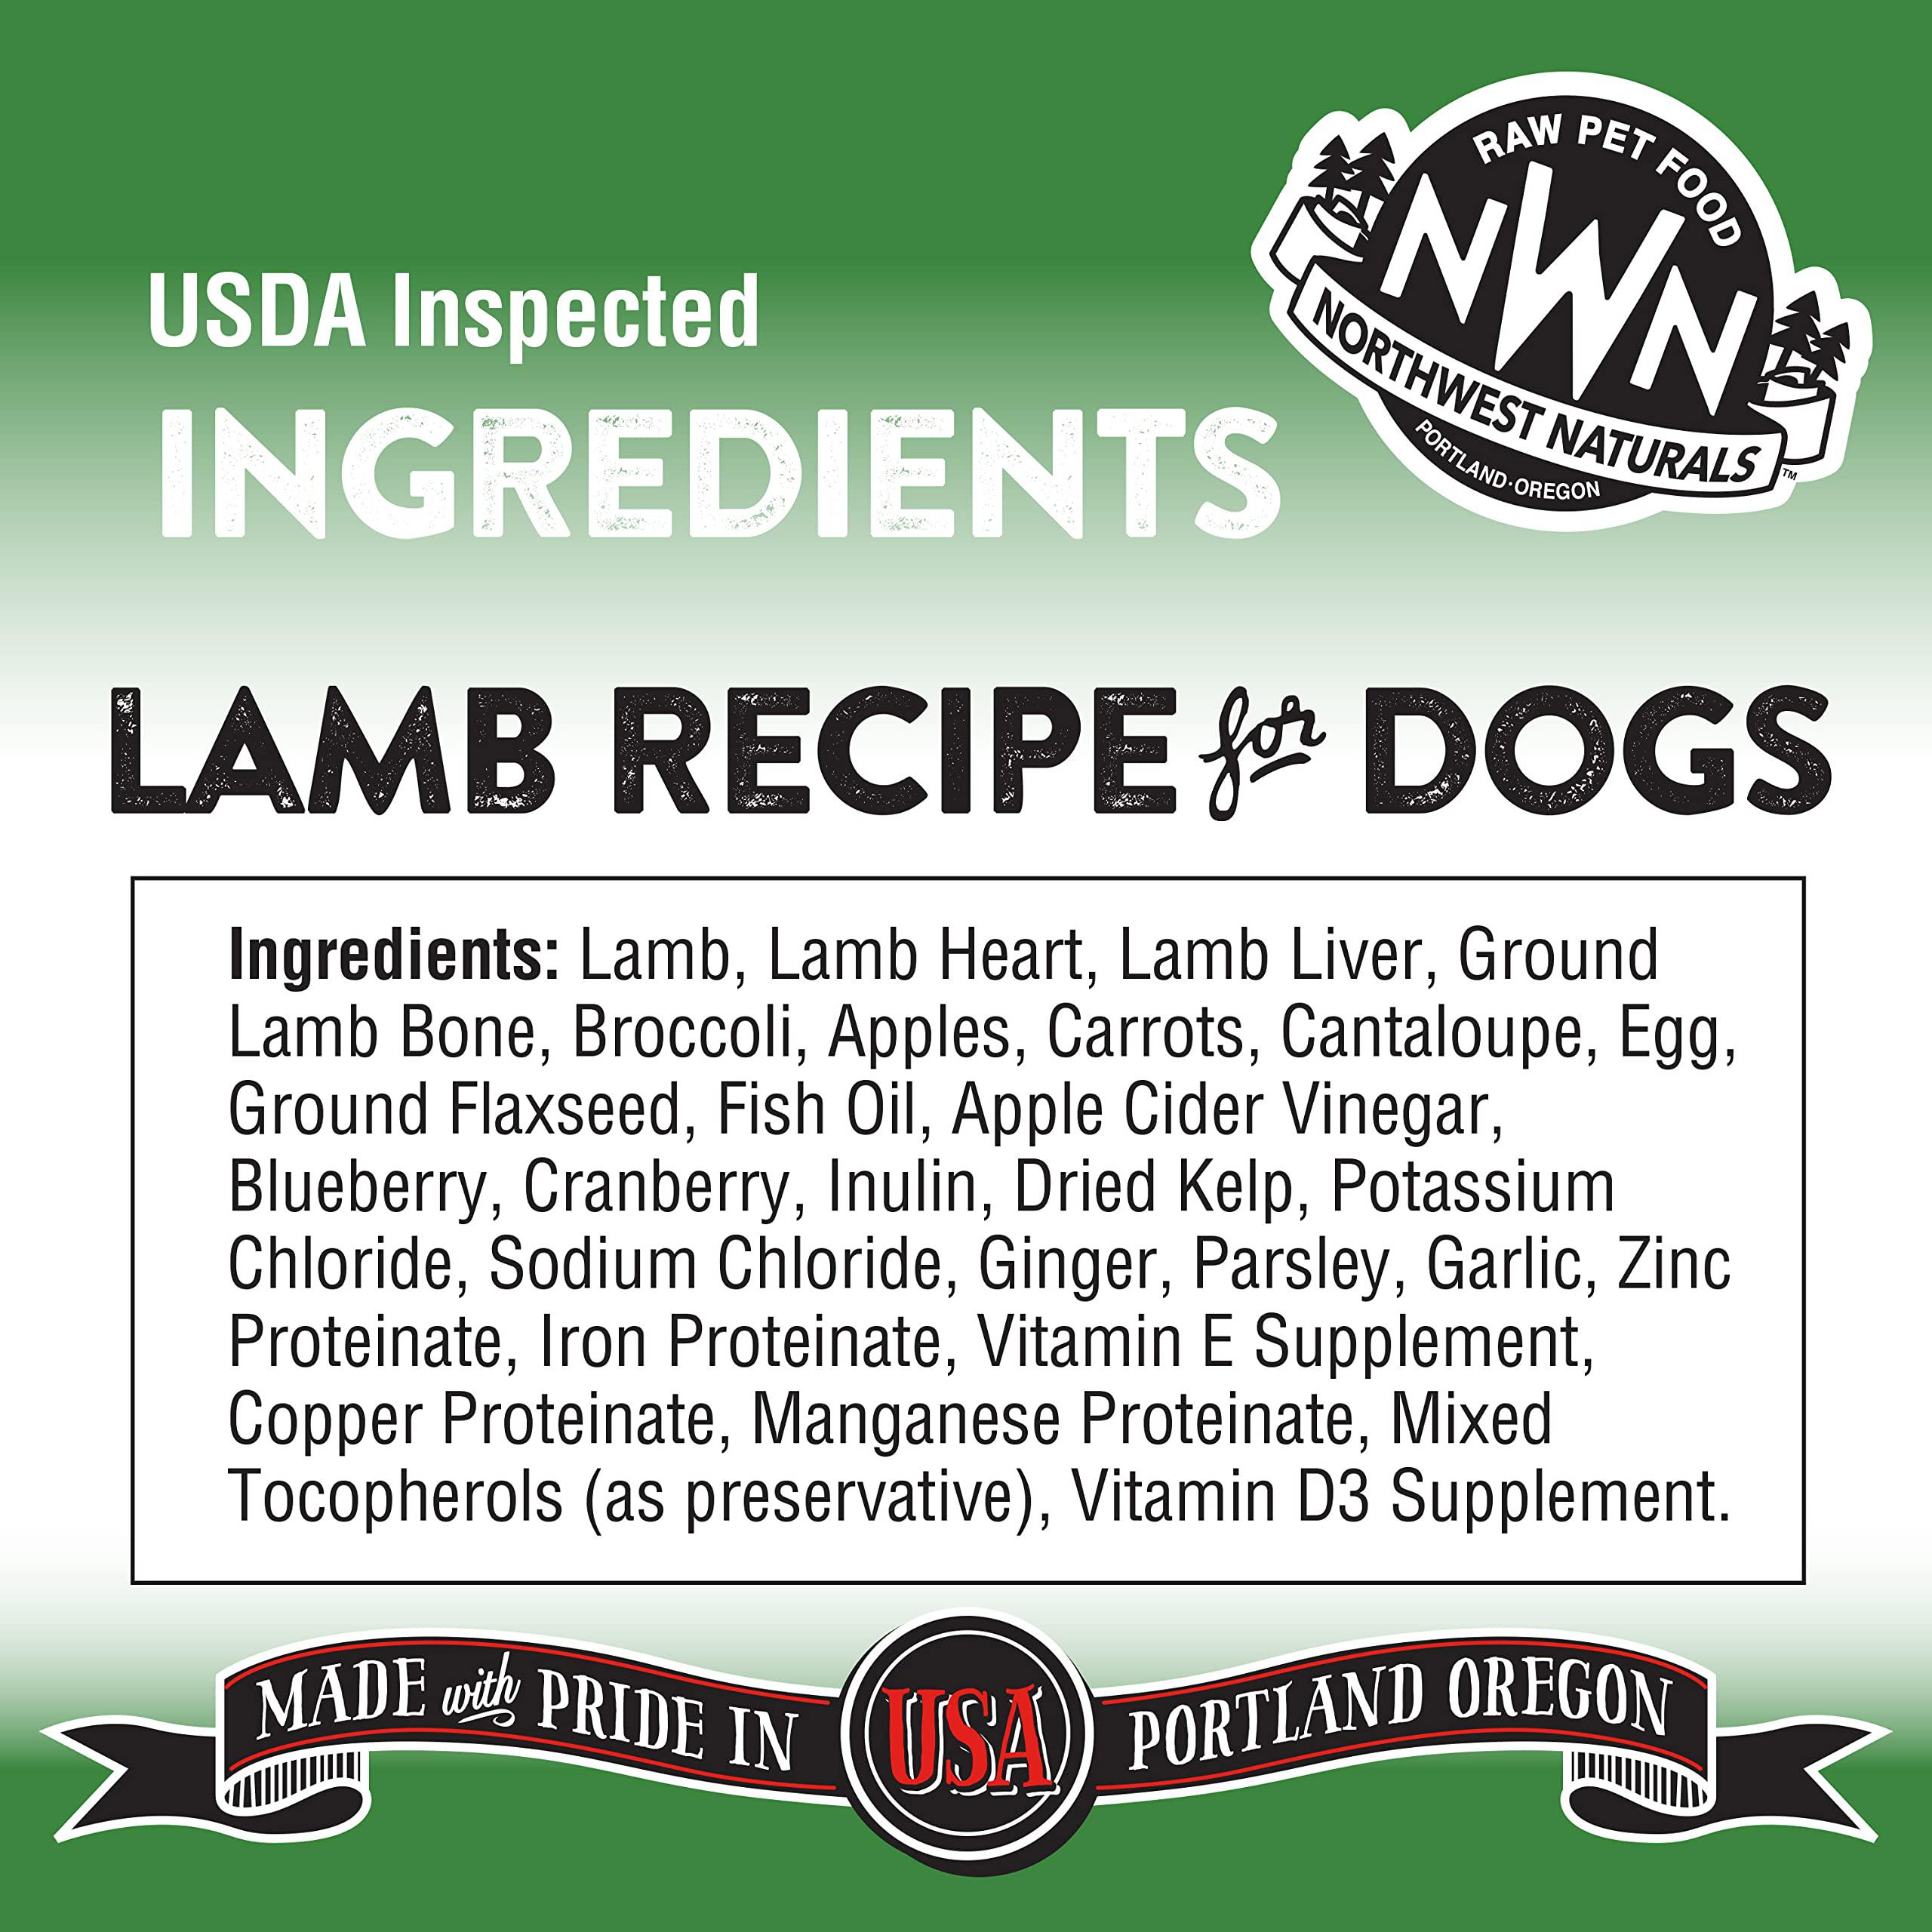 northwest naturals freeze dried raw diet for dogs freeze dried nuggets dog food - lamb - grain-free, gluten-free pet food, do